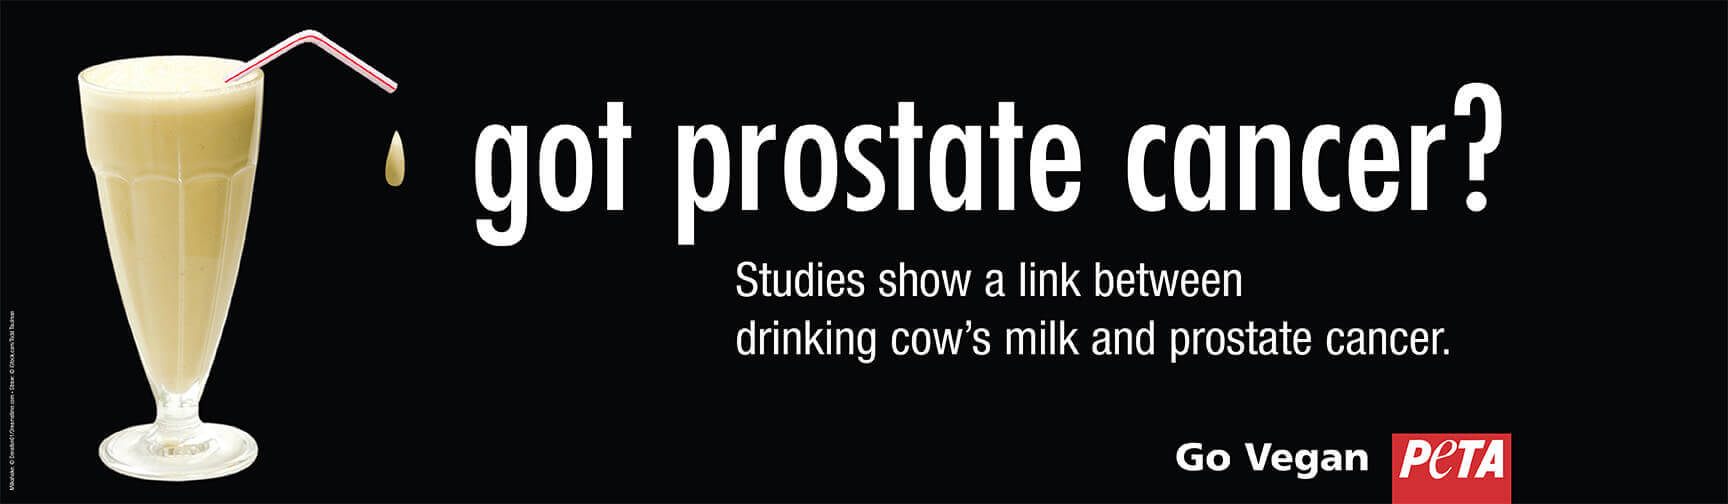 Whatâs the Real #MilkTruth? PETA Pours Dairy Industry a ...